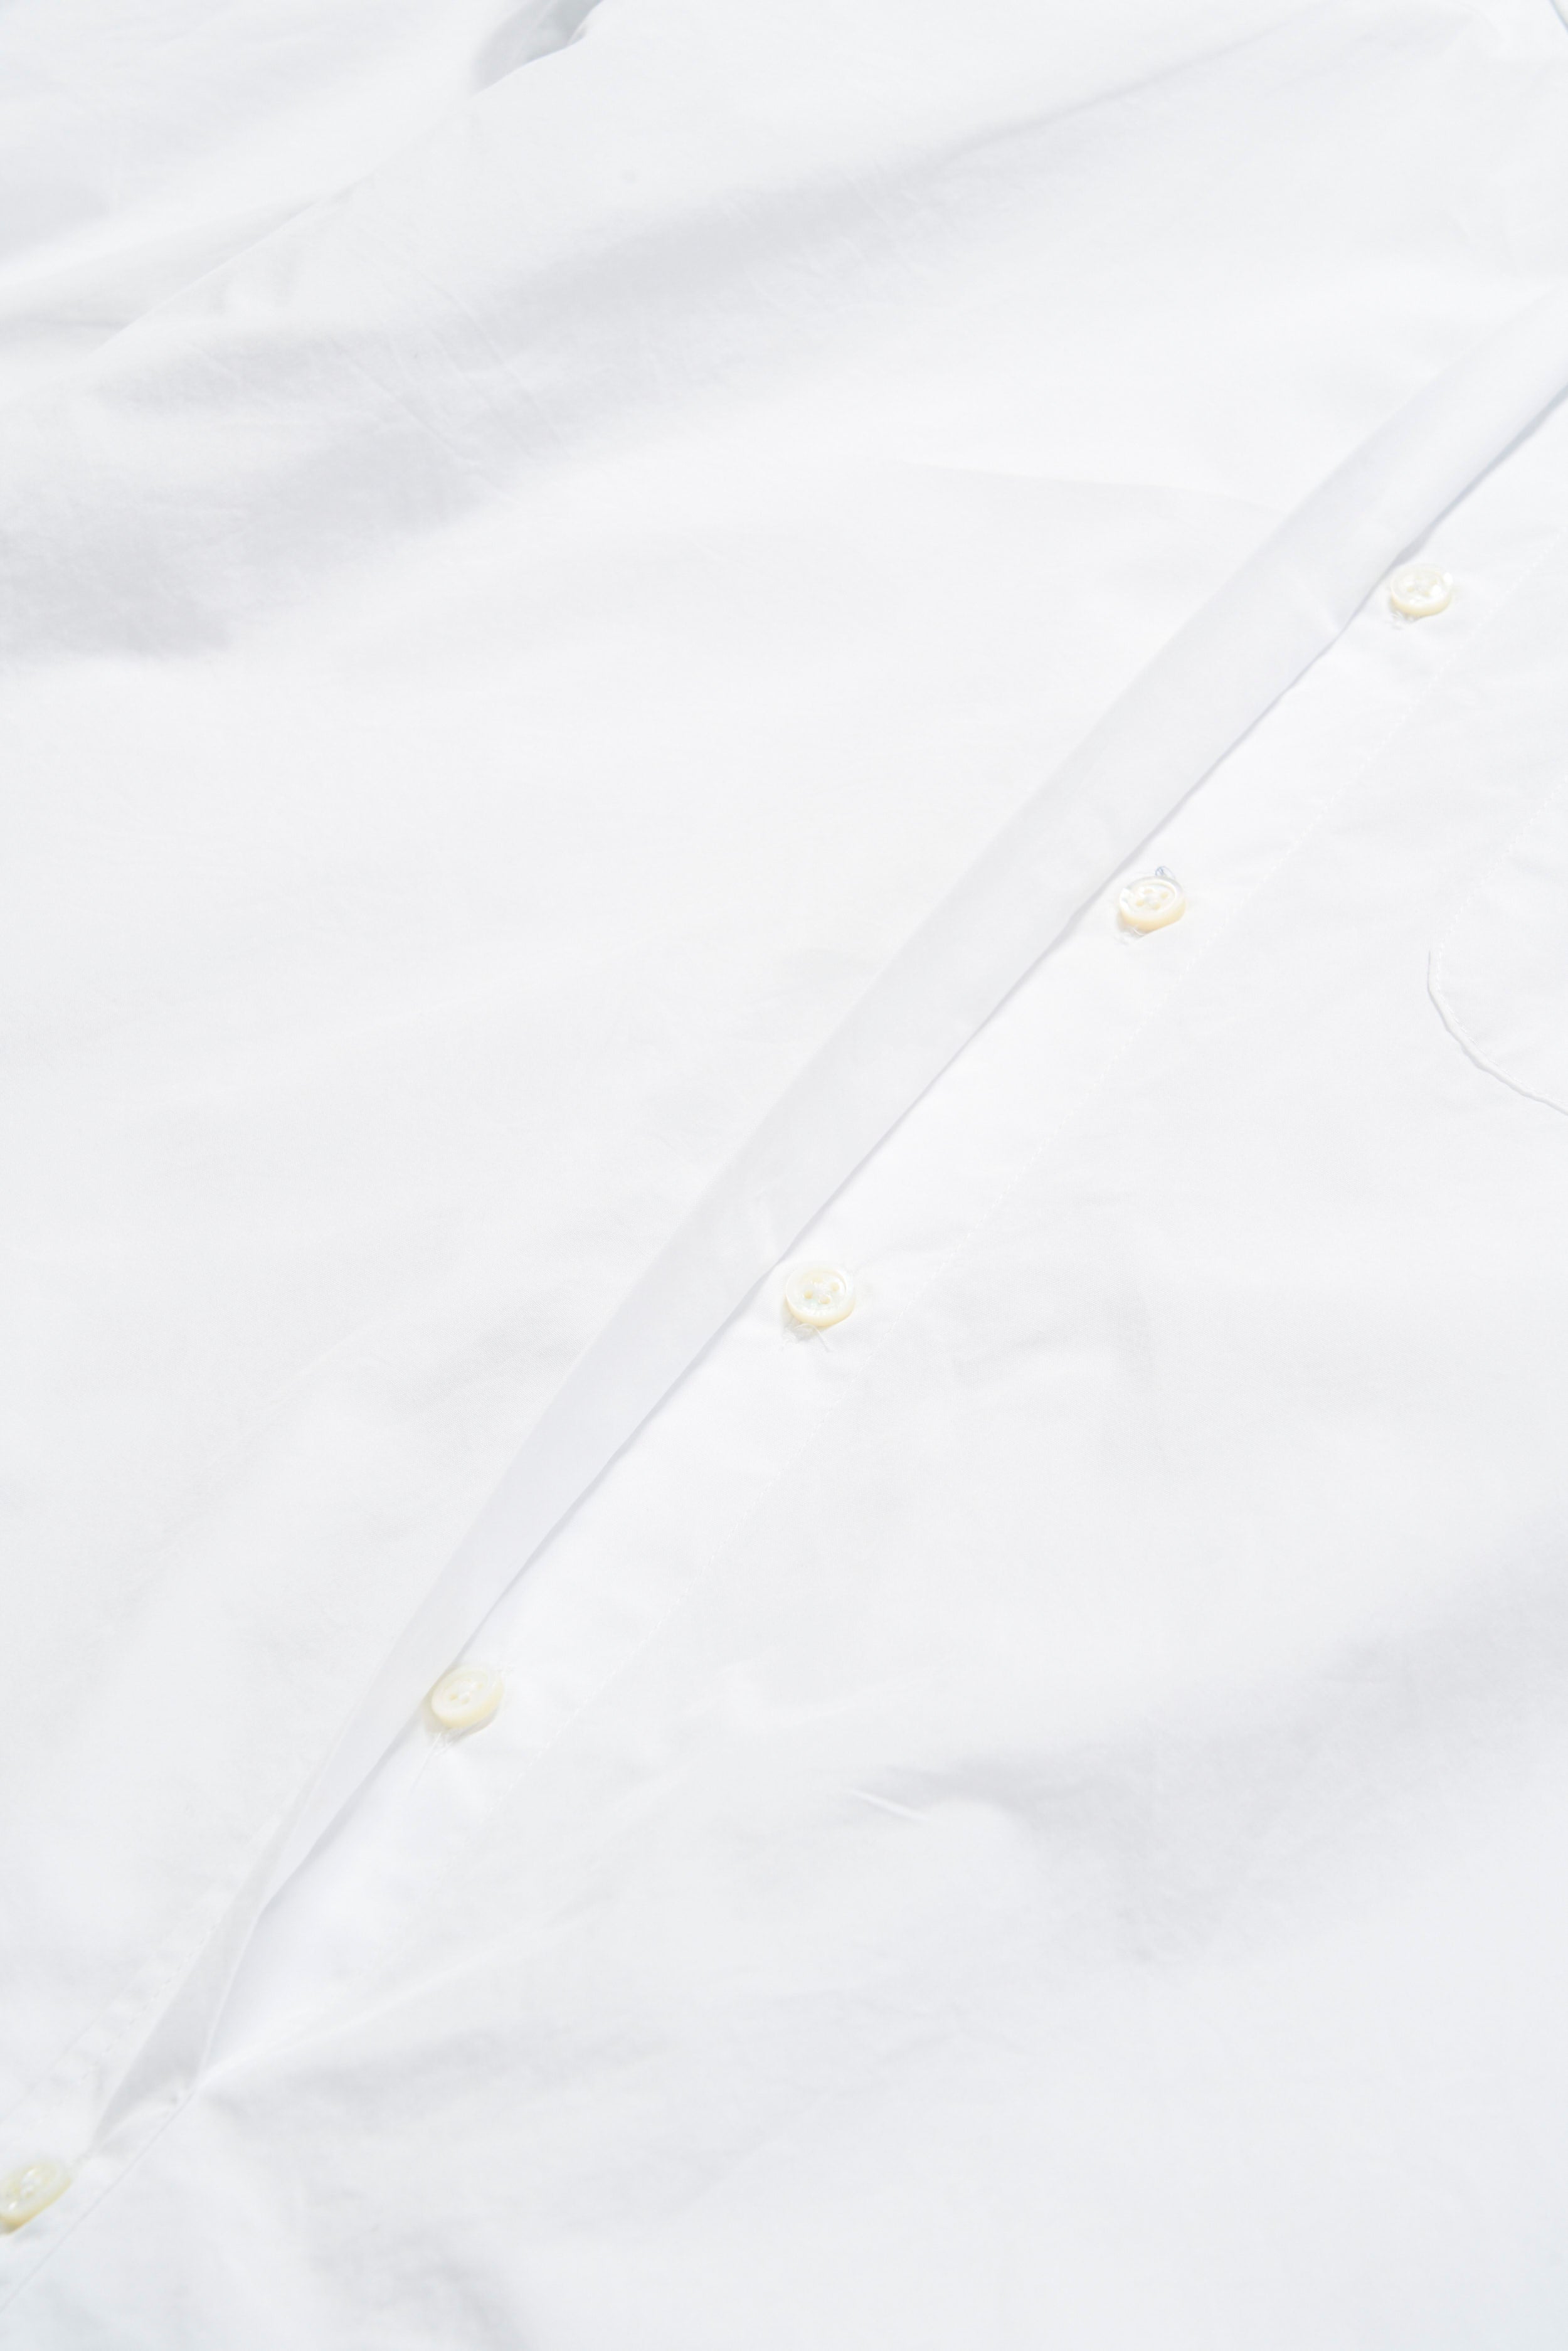 Rounded Collar Shirt - White 100's 2Ply Broadcloth